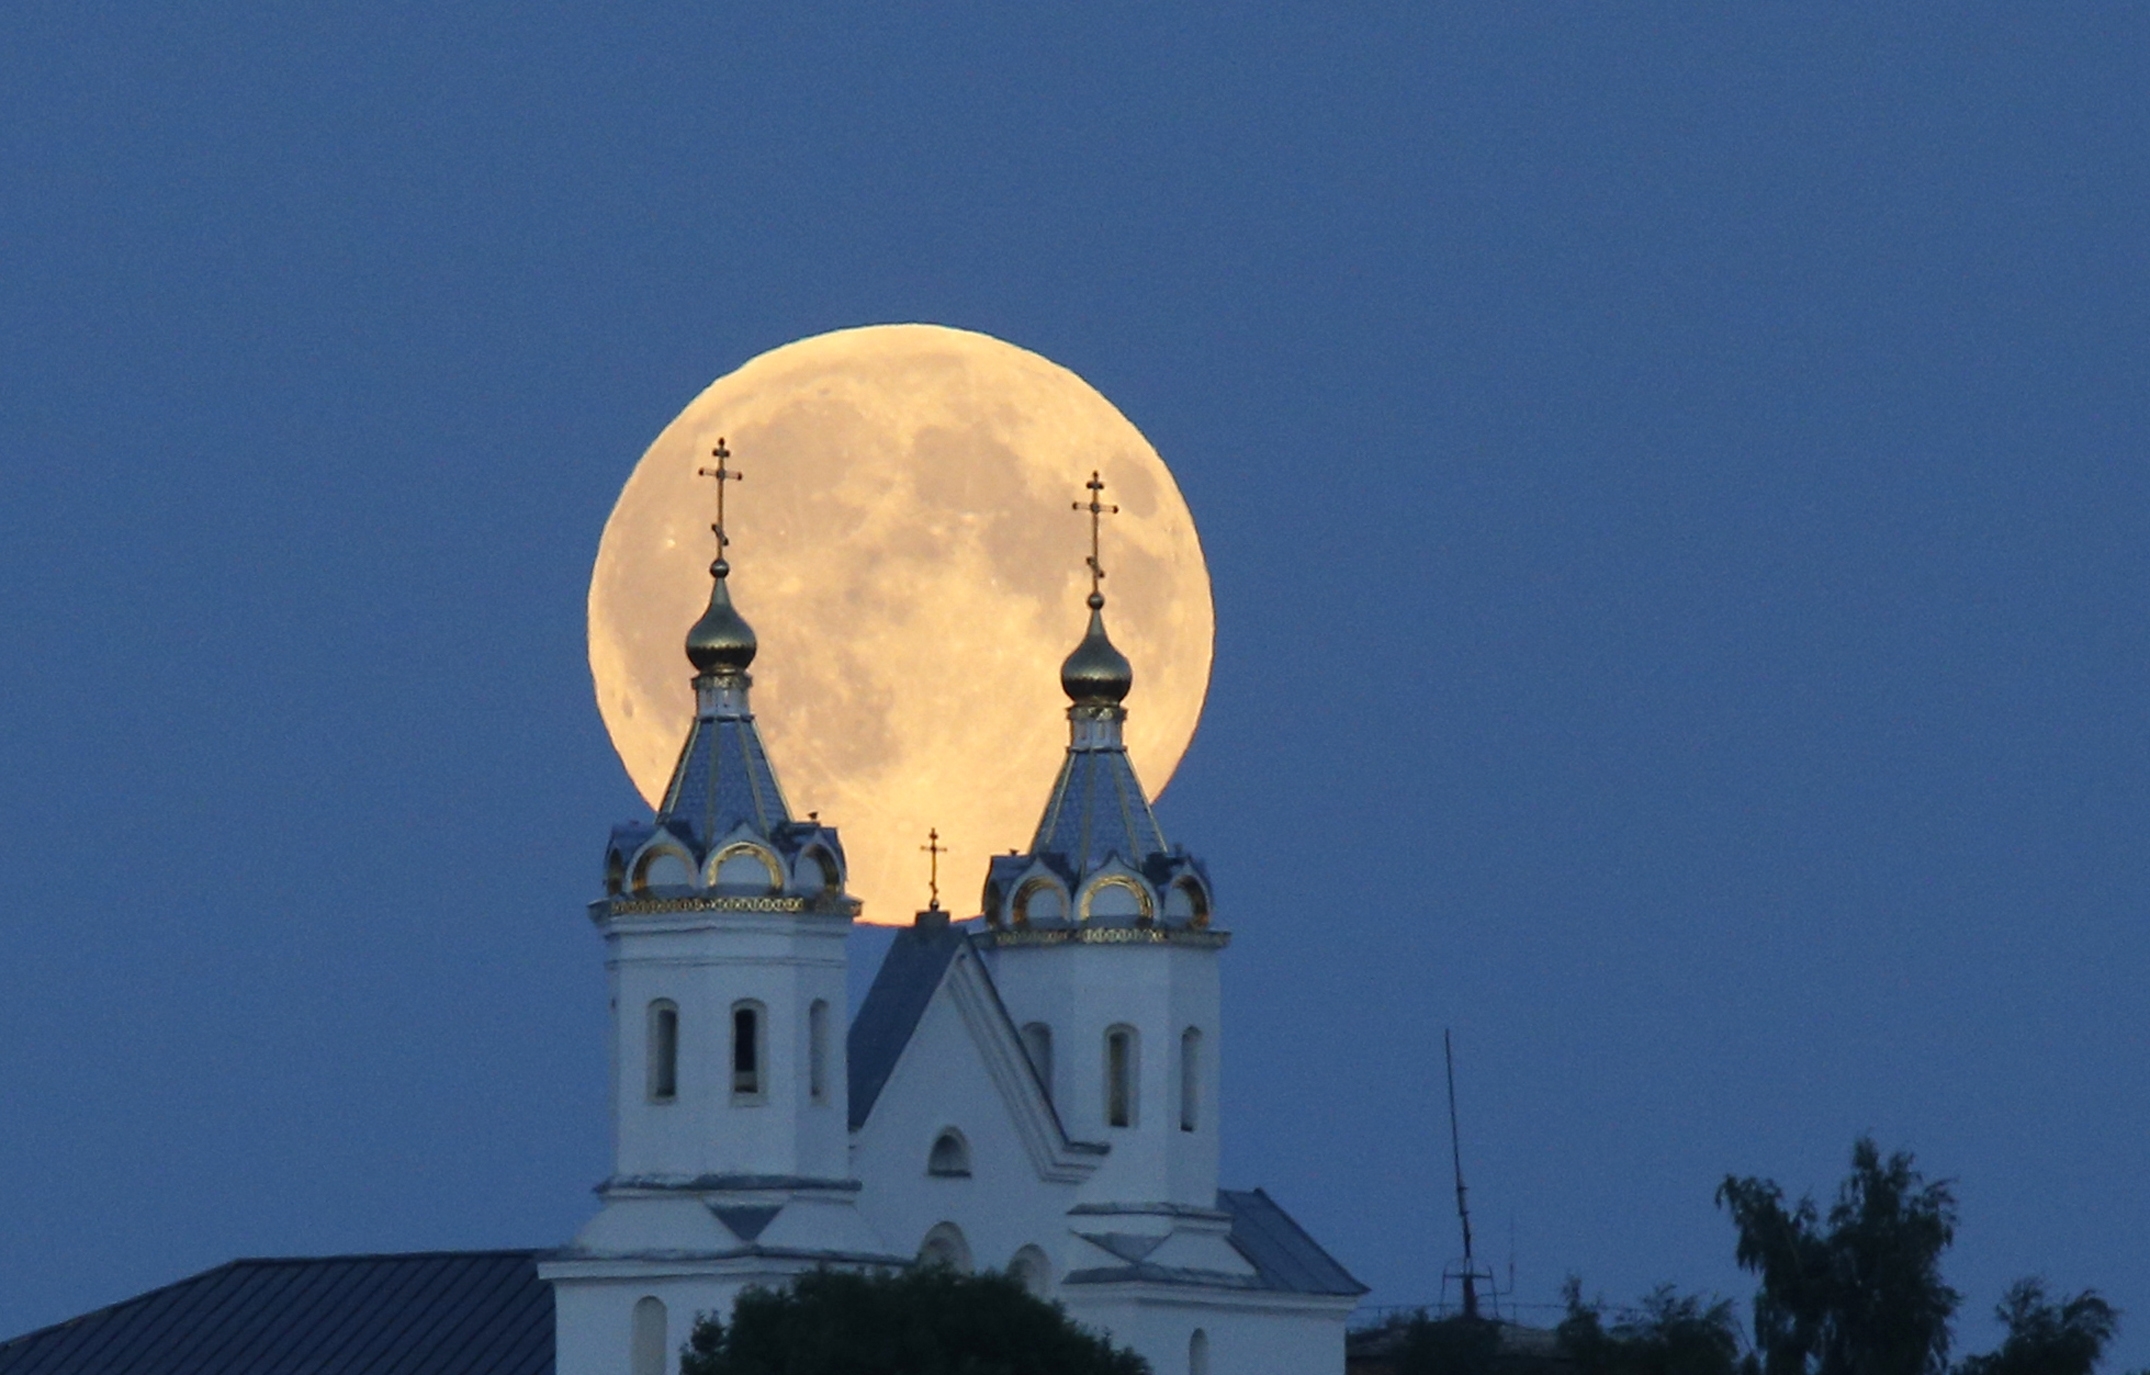 The super moon, rises above the Orthodox Church in the town of Novogrudok, 150 kilometers (93 miles) west of the capital Minsk, Belarus